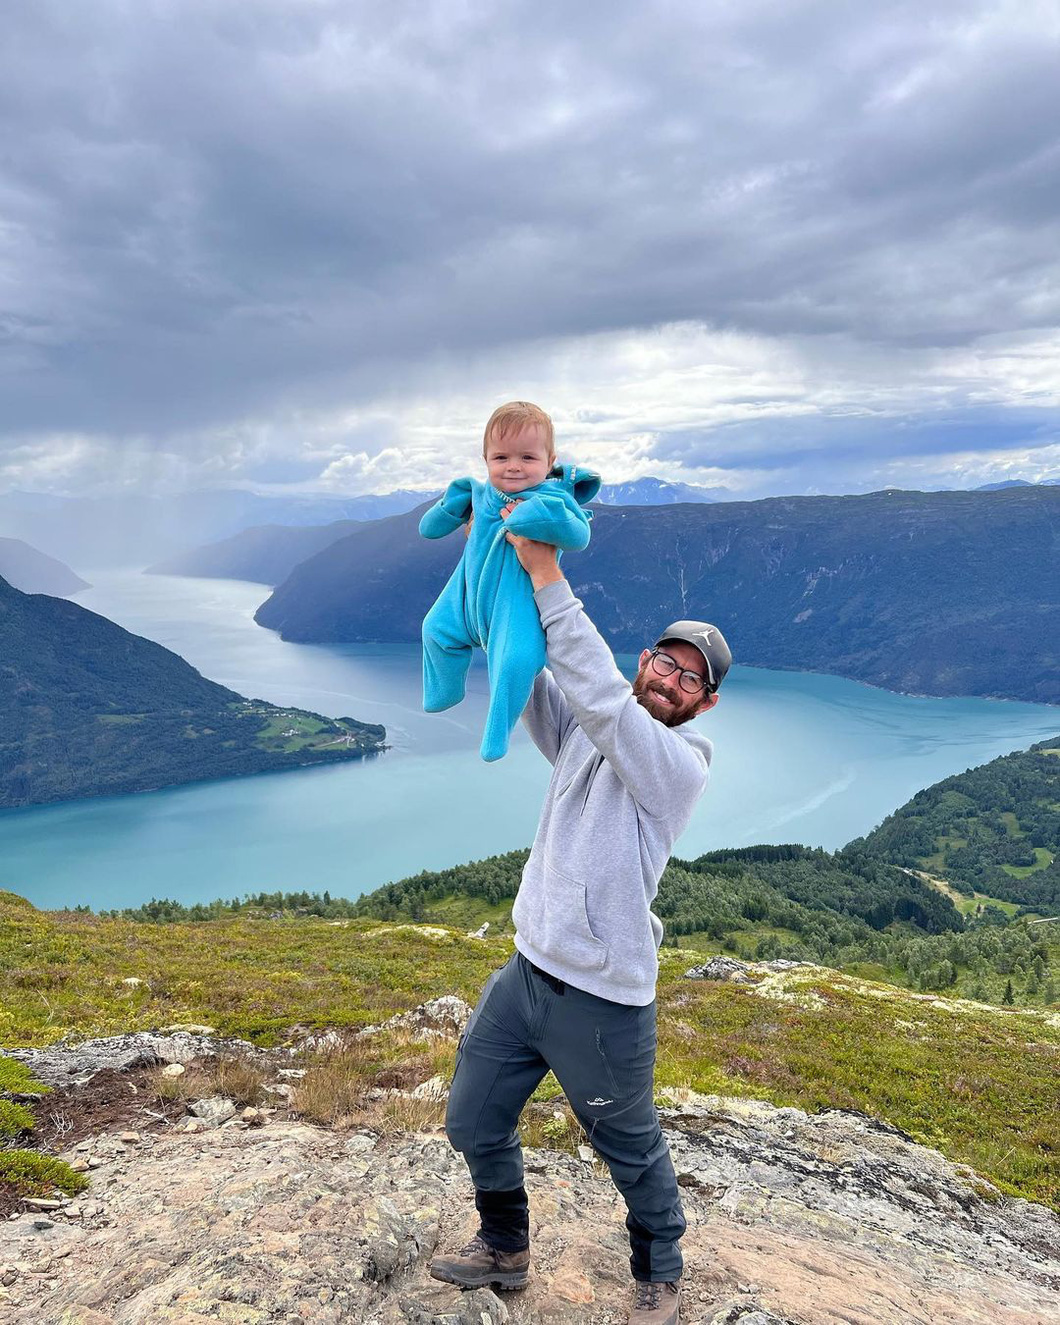 11-month-old baby has traveled to 23 countries: crawling in Switzerland, teething in Norway, weaning in France - Photo 7.